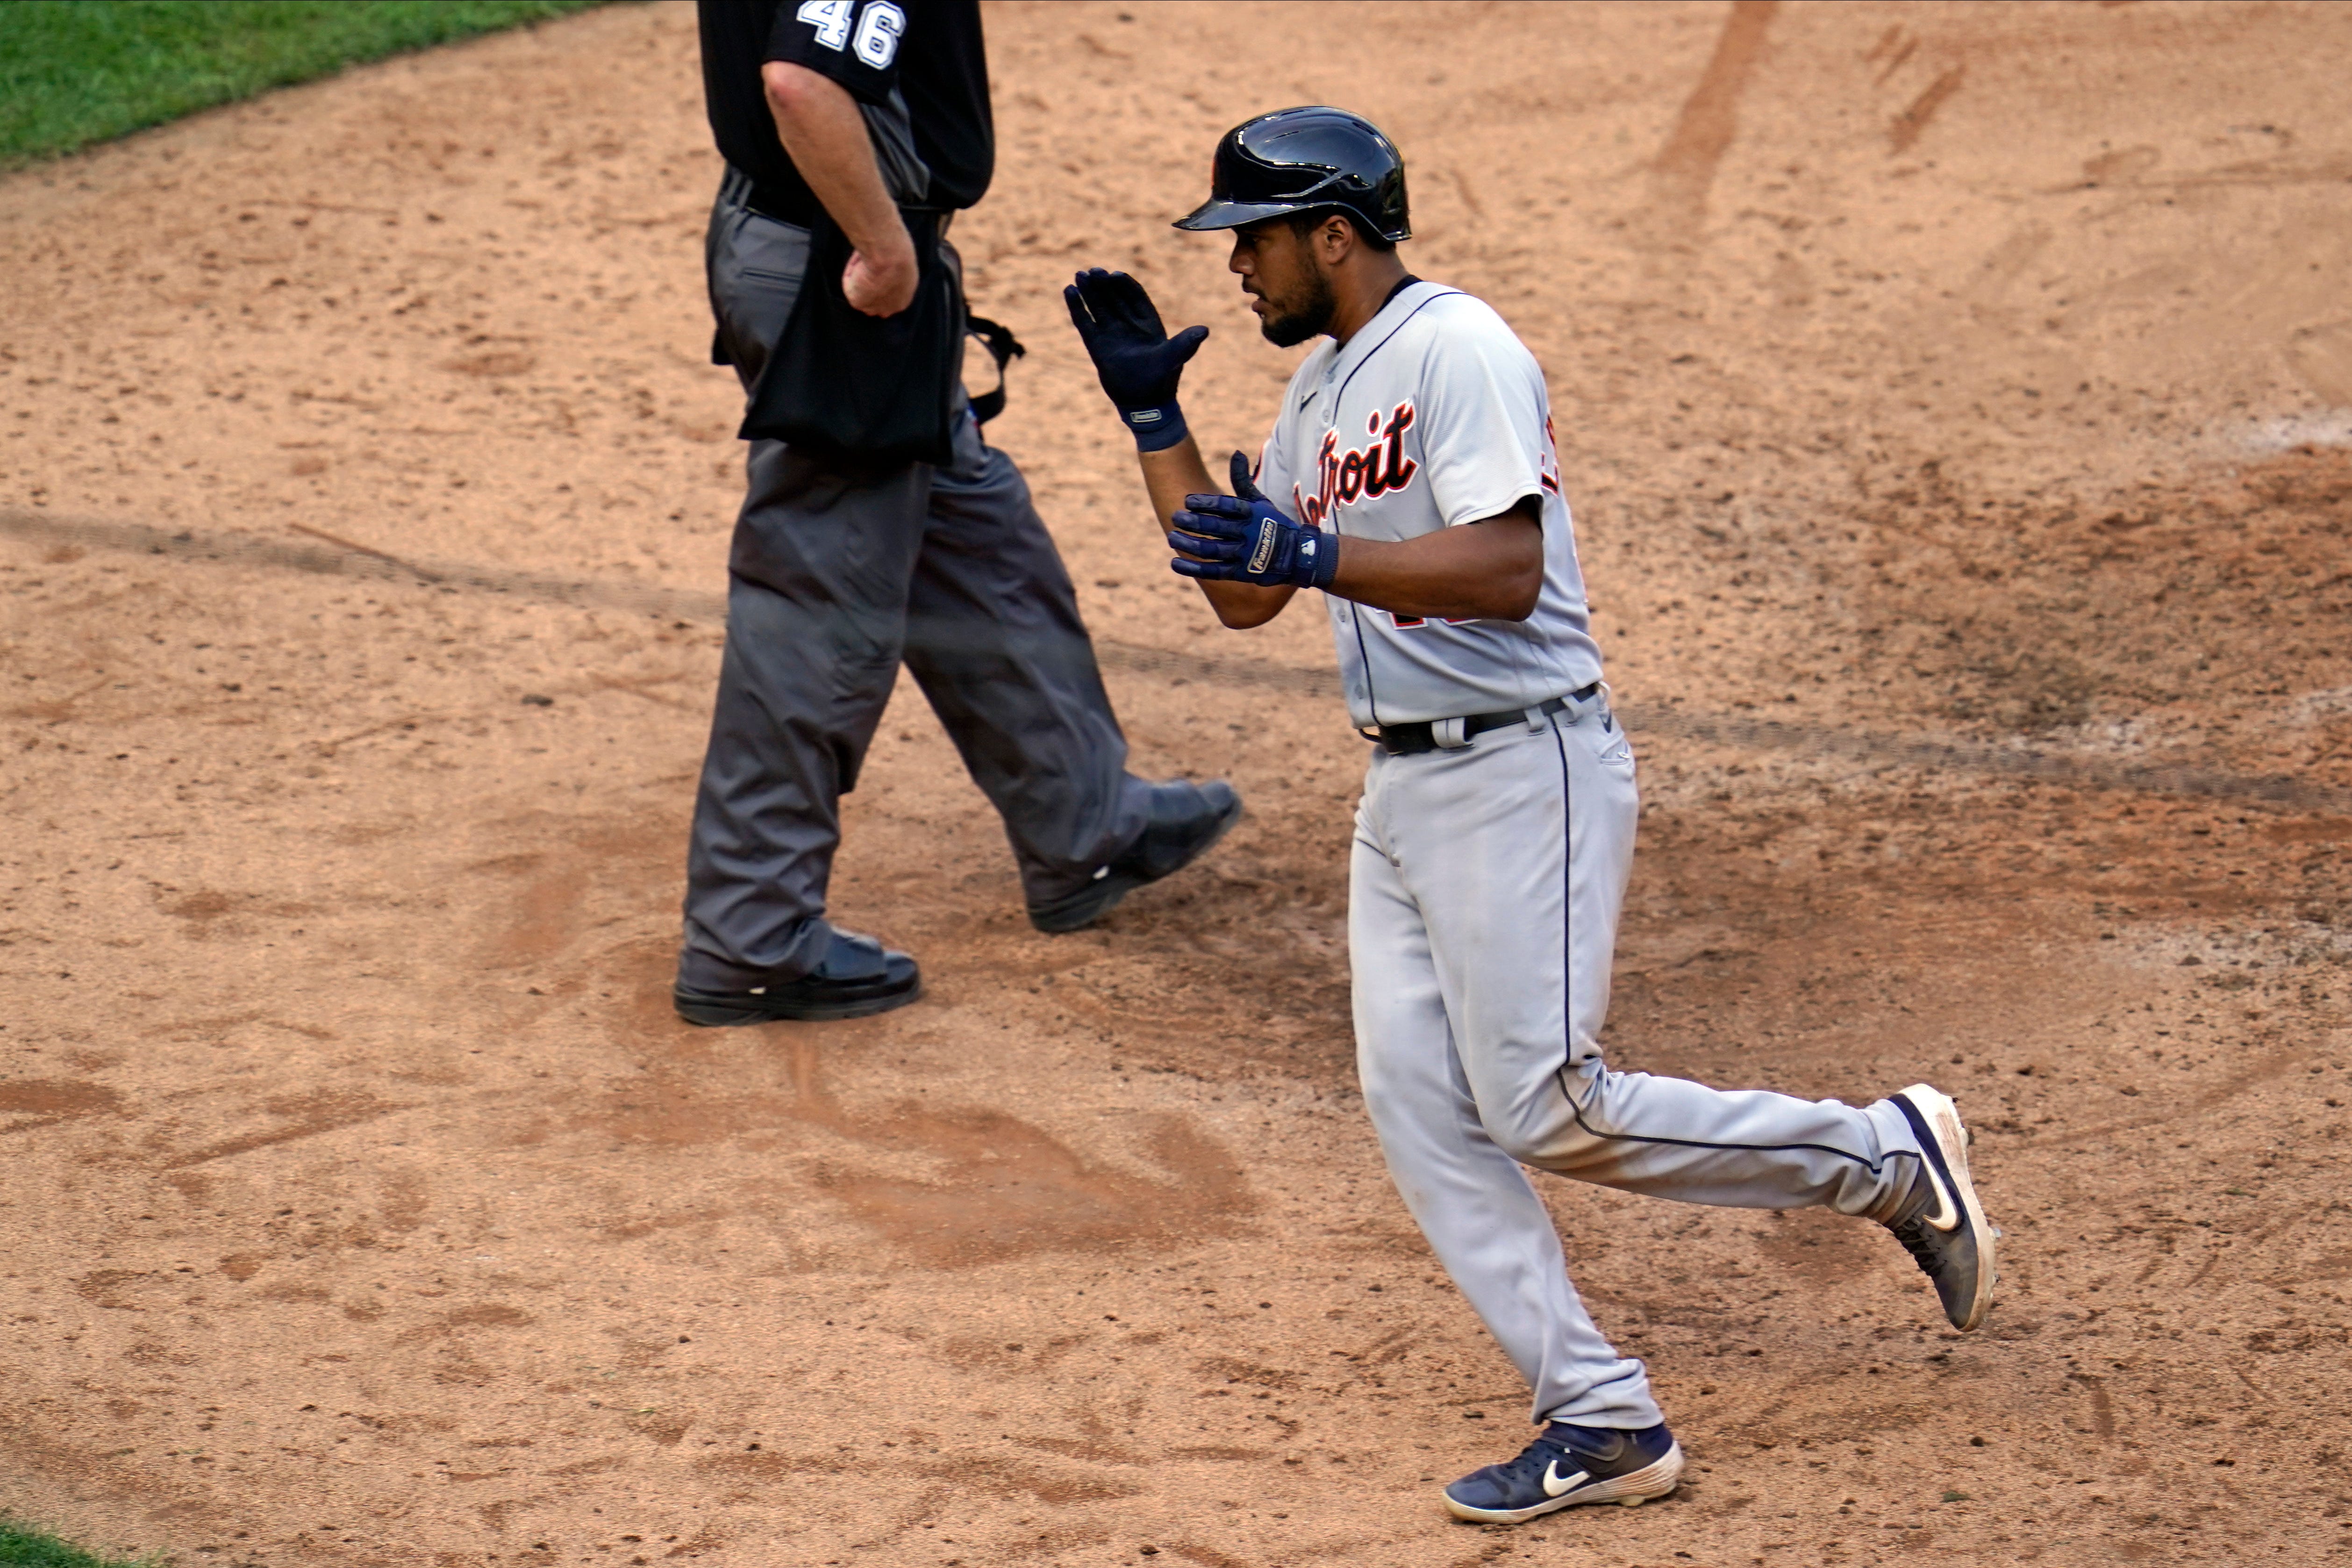 Detroit Tigers' Jeimer Candelario applauds as he scores to tie a baseball game on a single by Willi Castro off Minnesota Twins' pitcher Tyler Duffey in the seventh inning.